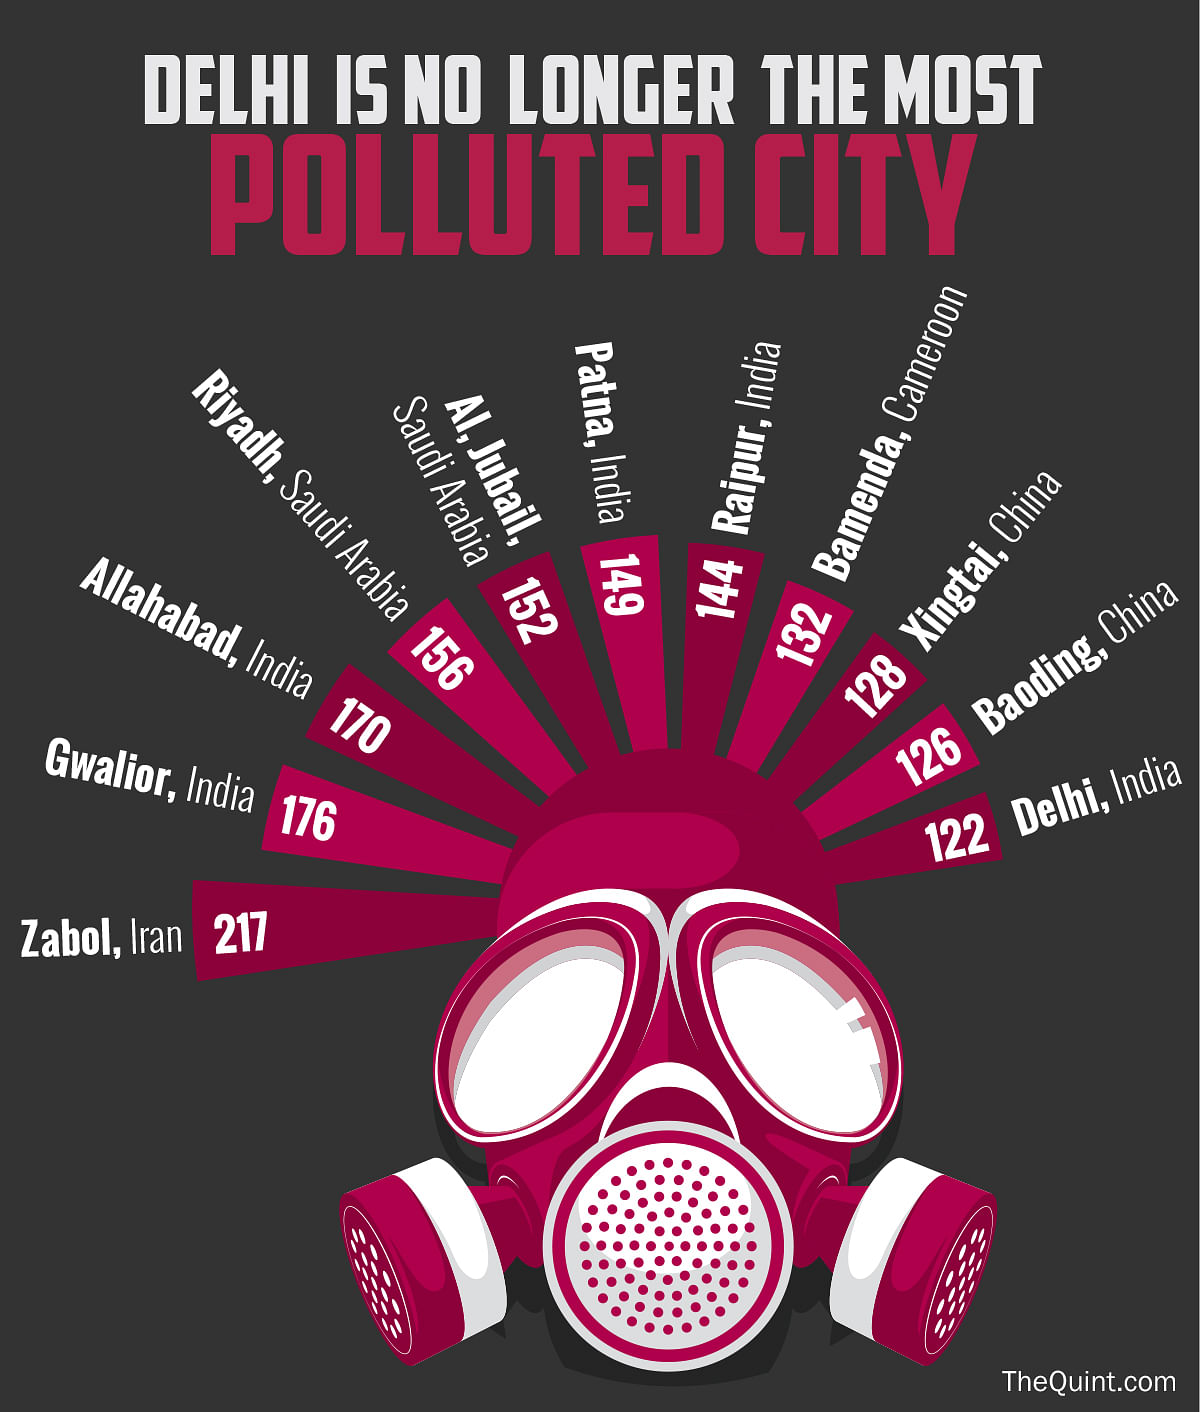 Delhi now ranks 11th among 3,000 cities according to a recent WHO report on urban air quality.